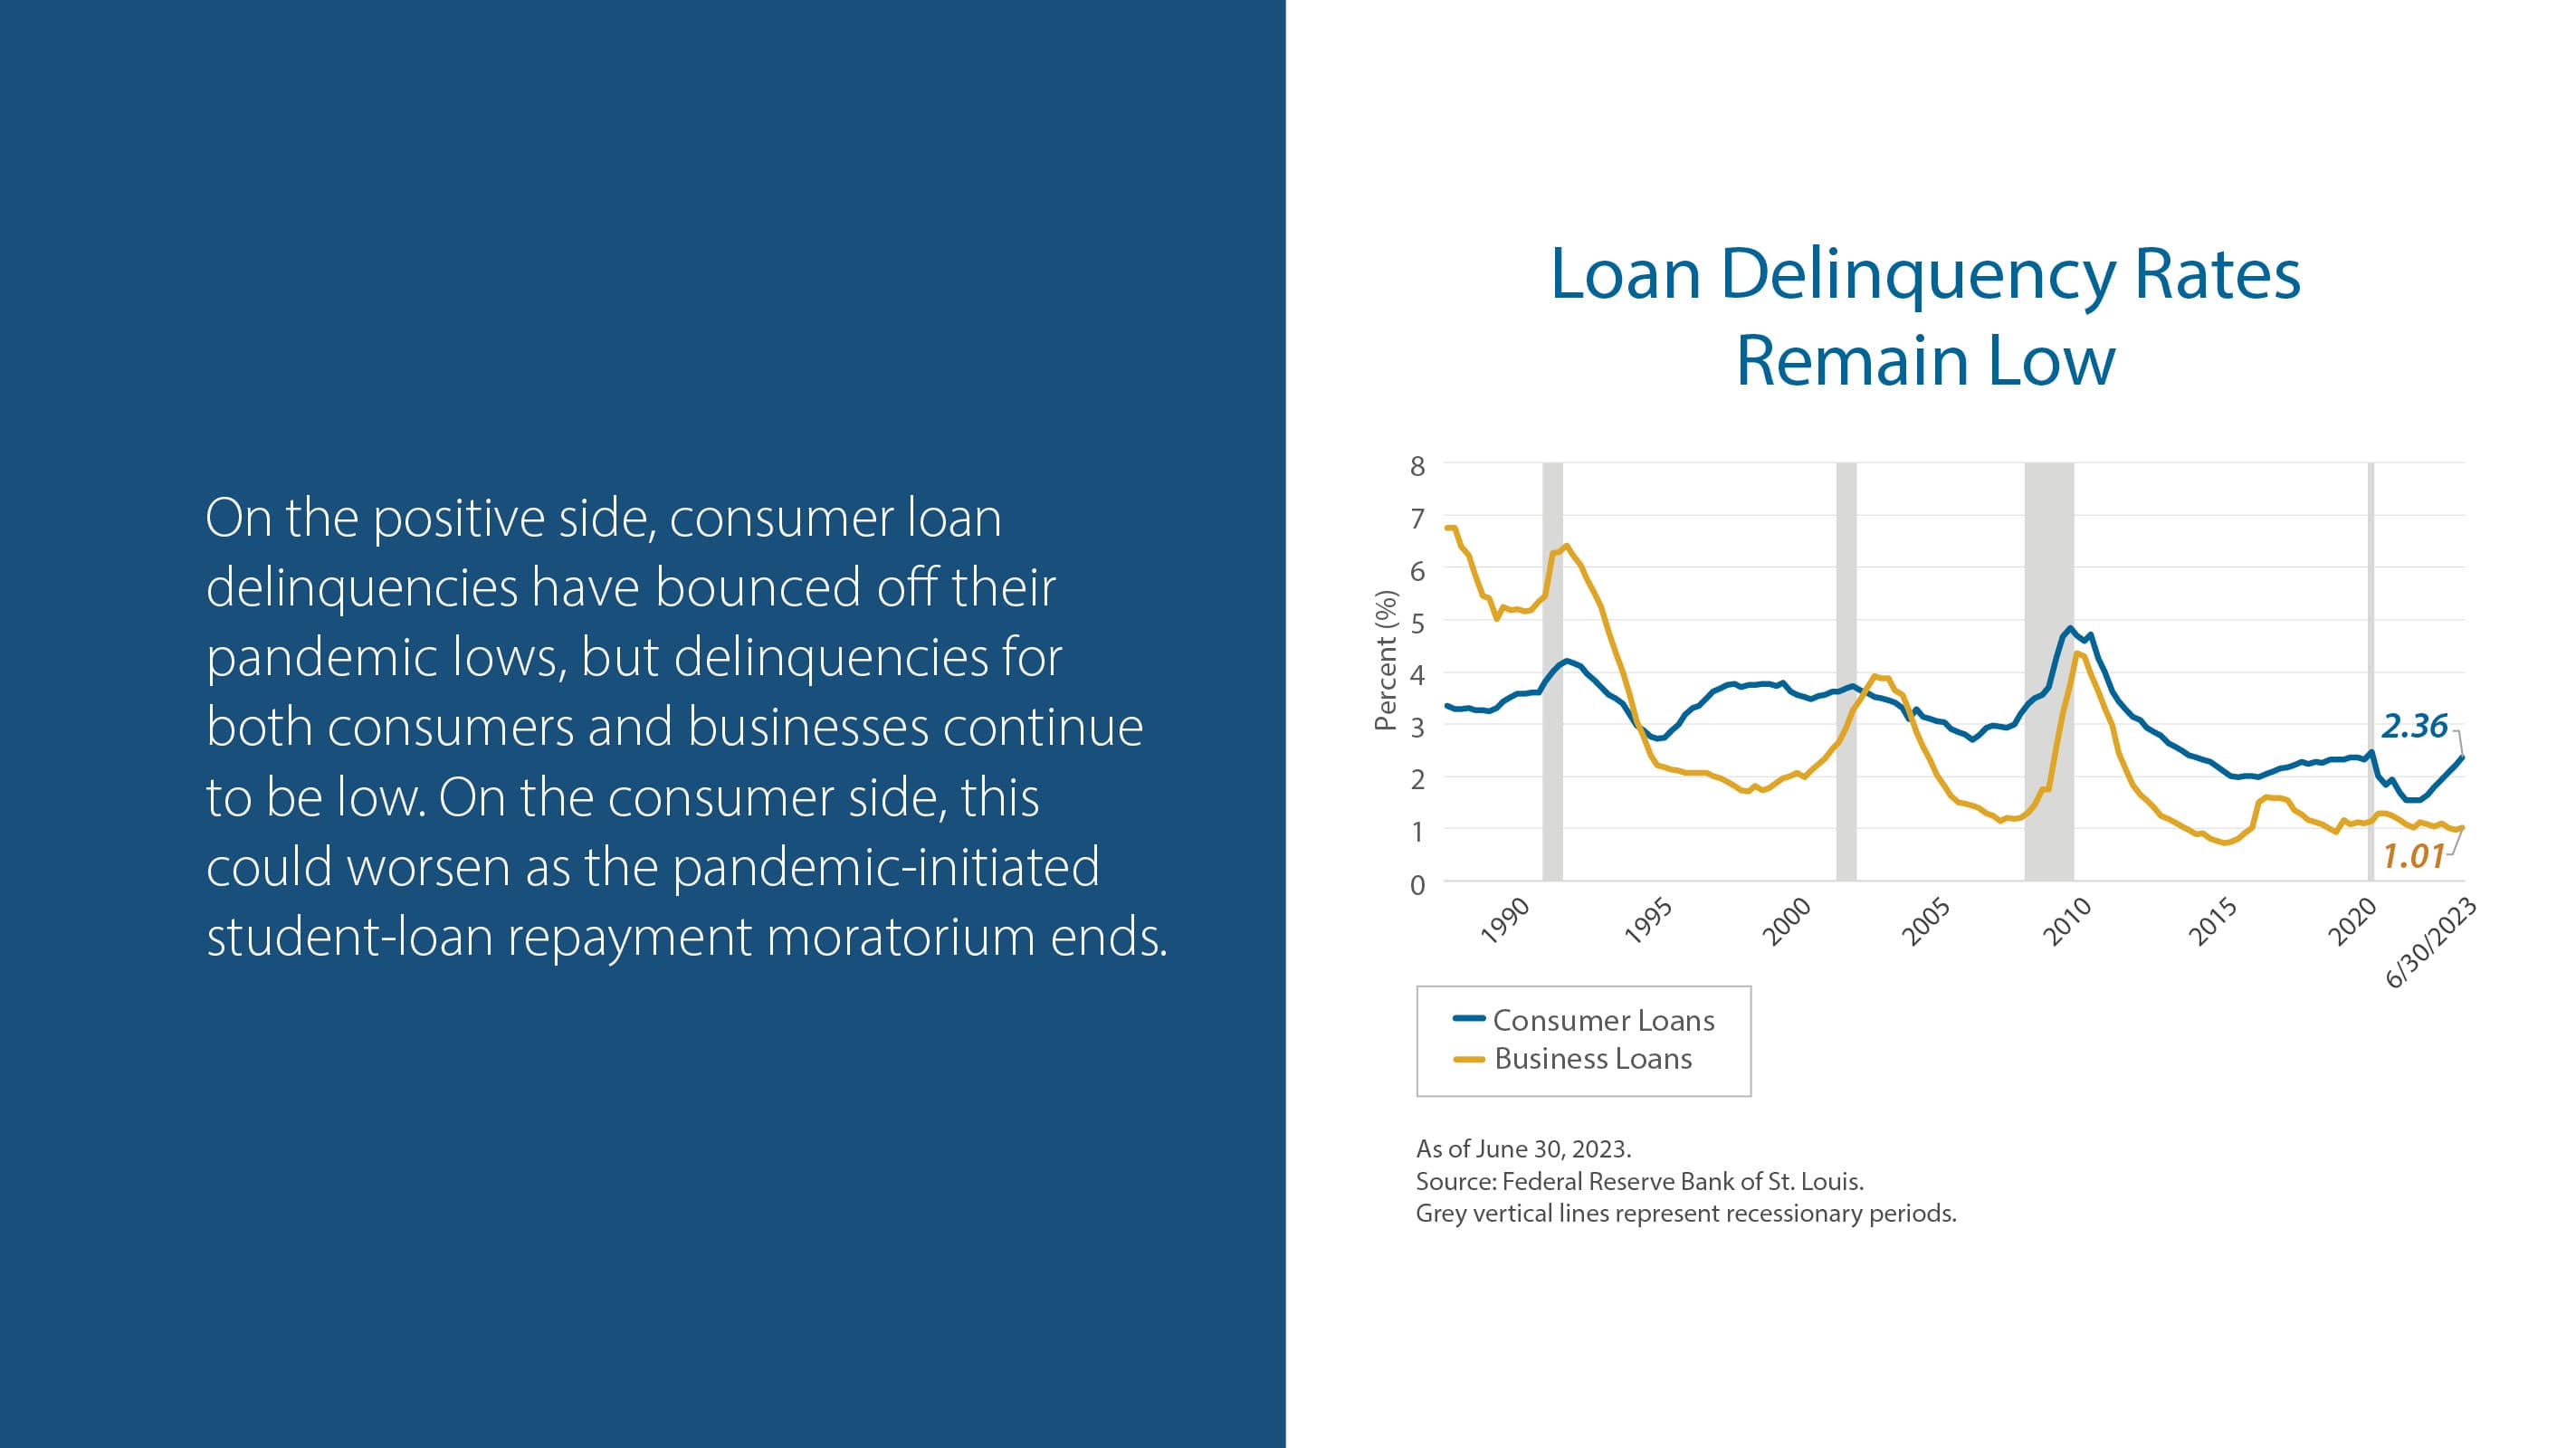 Loan Delinquency Rates Remain Low